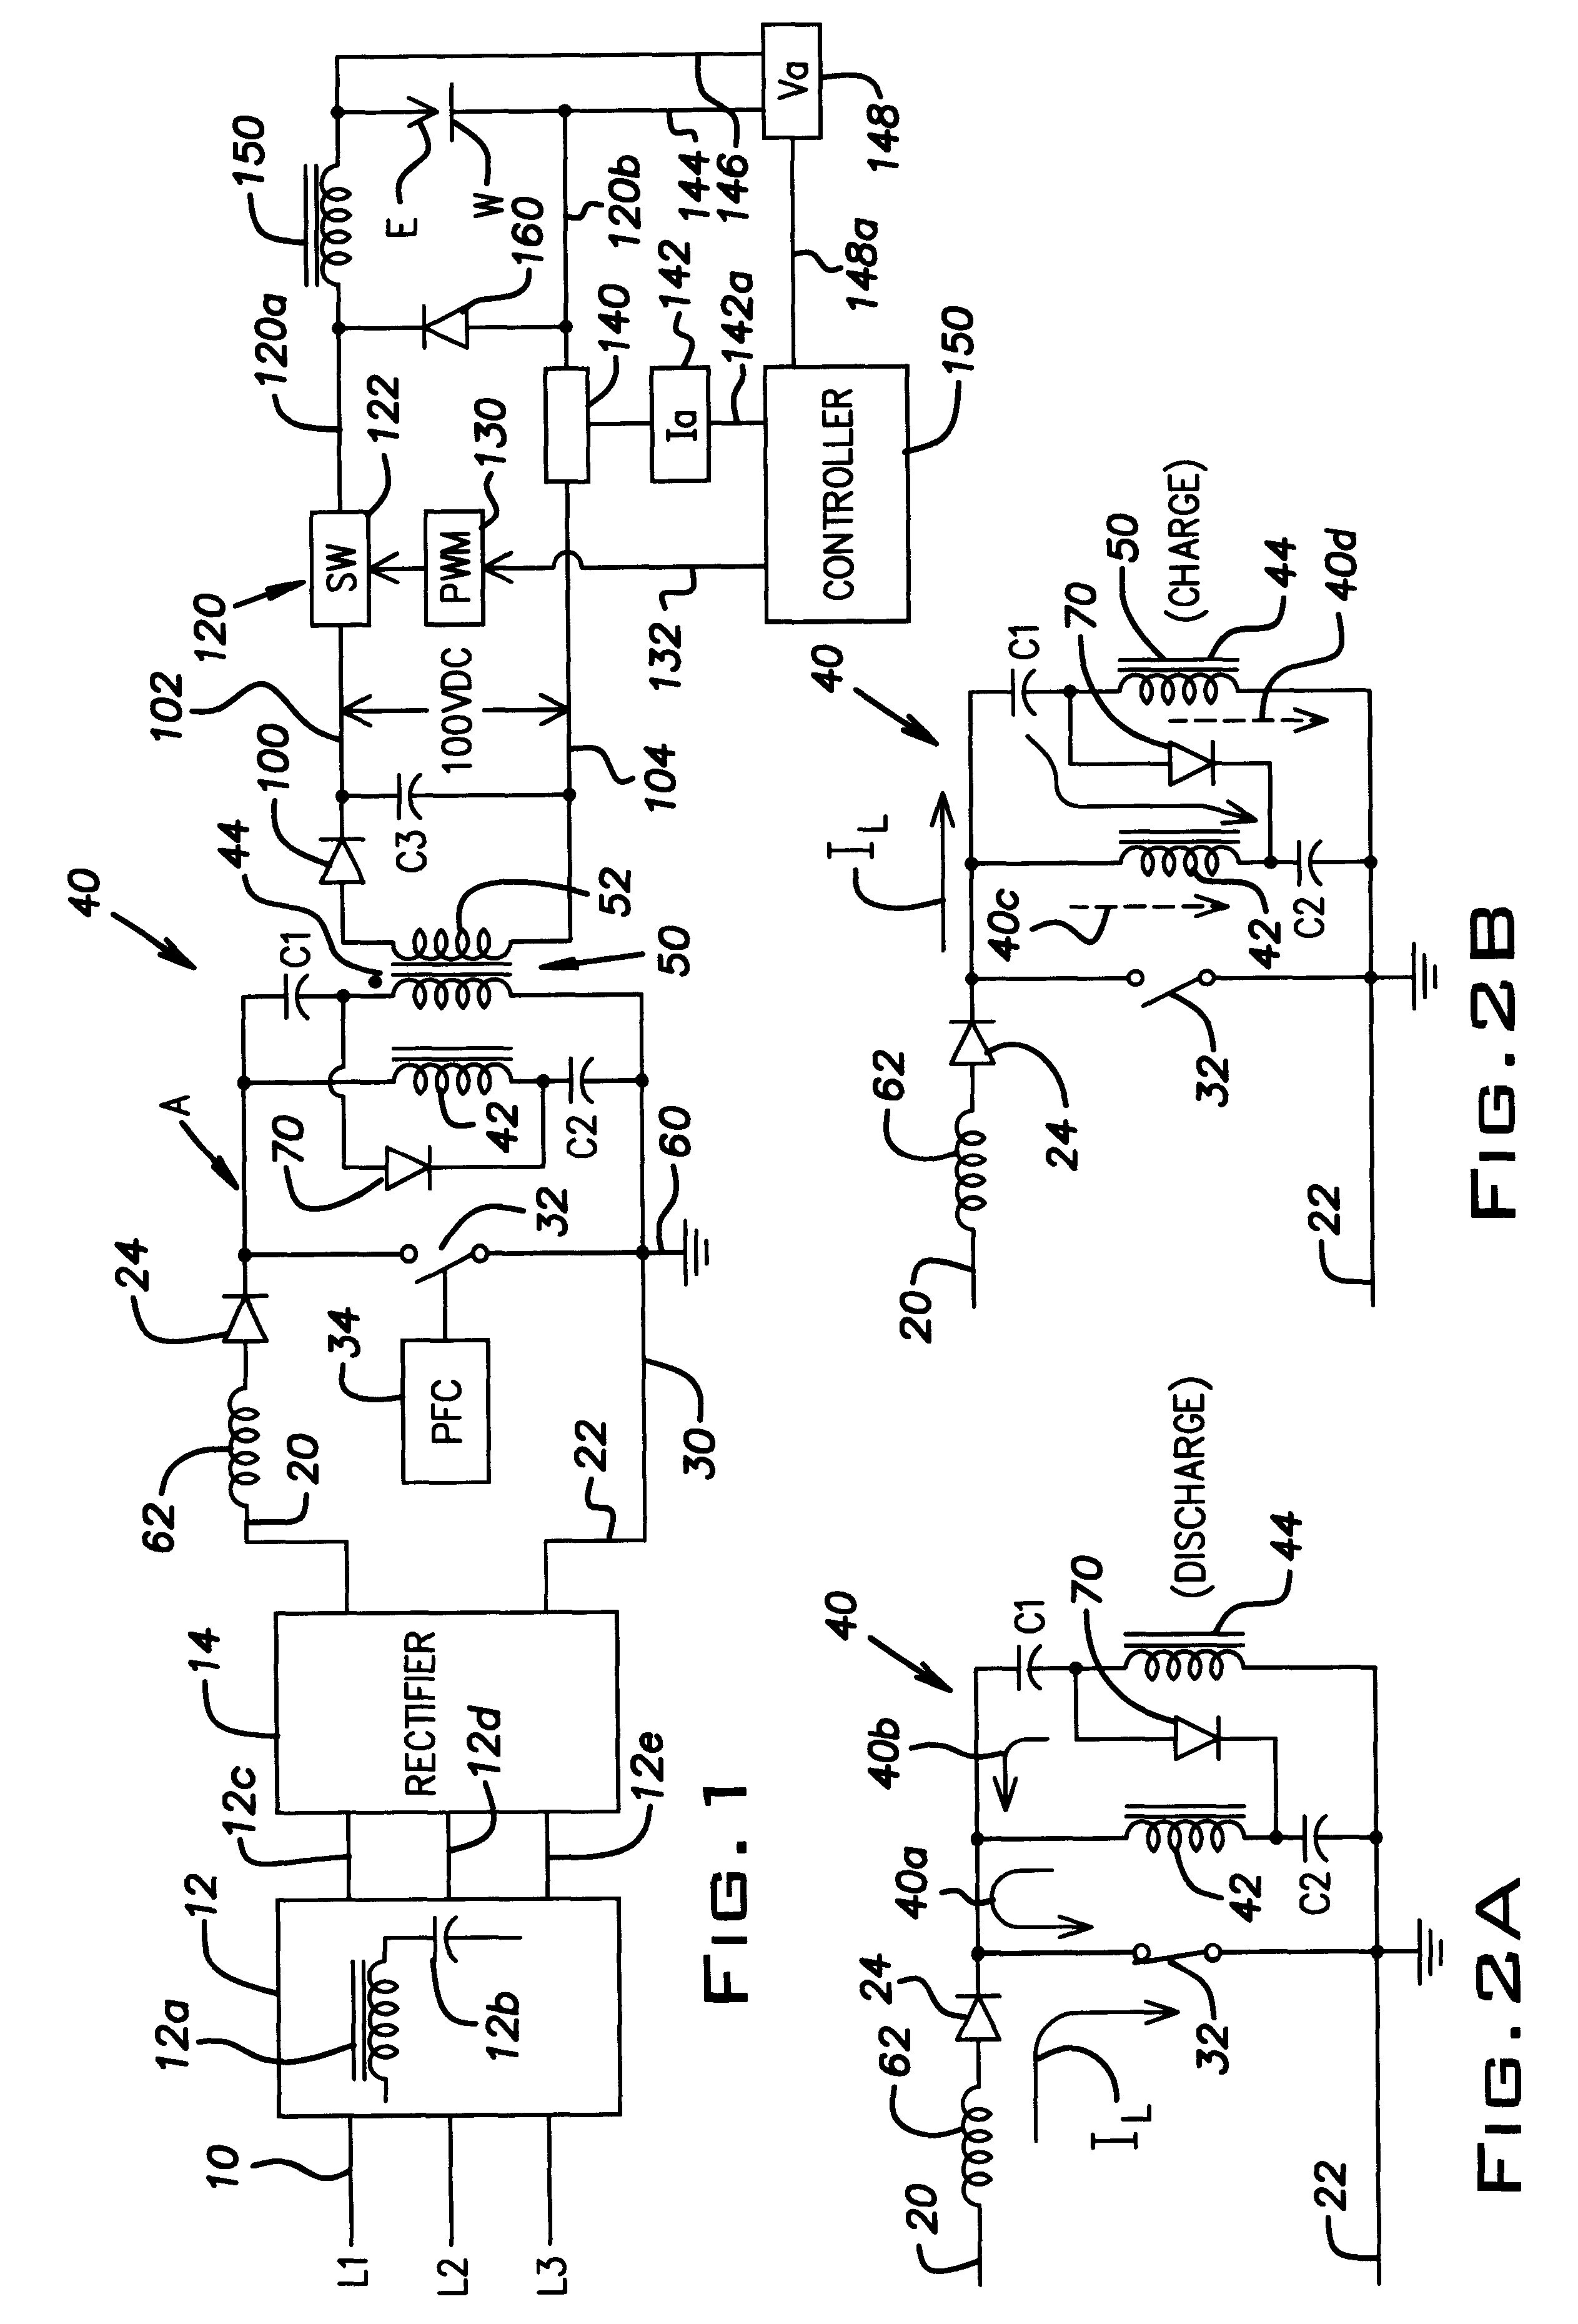 Electric arc welder for variable AC input